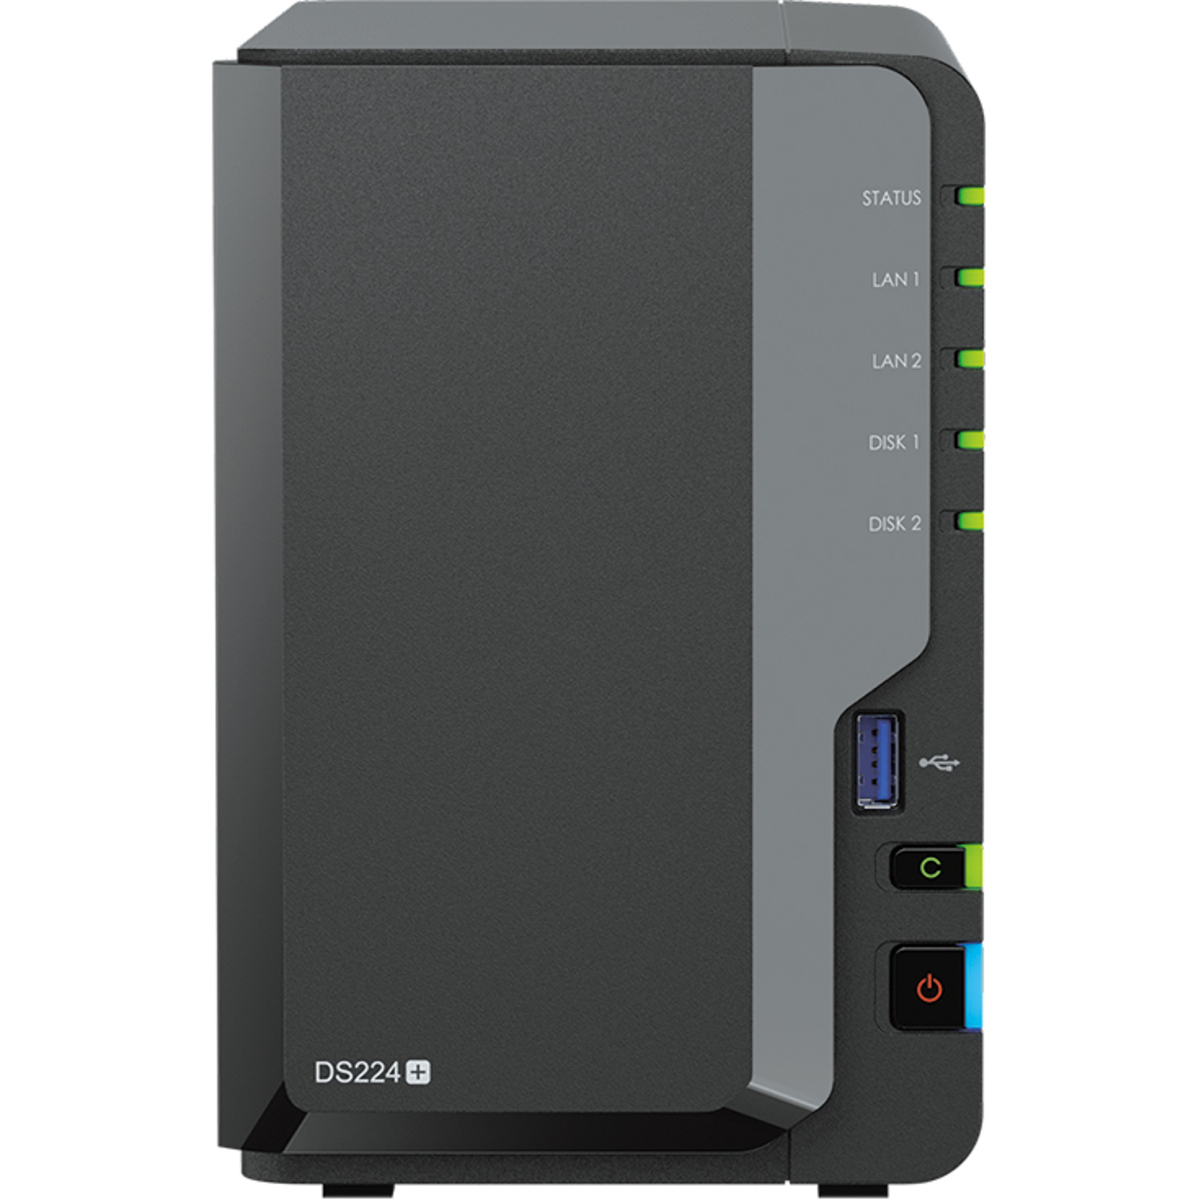 Synology DiskStation DS224+ 20tb 2-Bay Desktop Personal / Basic Home / Small Office NAS - Network Attached Storage Device 2x10tb Seagate EXOS X18 ST10000NM018G 3.5 7200rpm SATA 6Gb/s HDD ENTERPRISE Class Drives Installed - Burn-In Tested - ON SALE - FREE RAM UPGRADE DiskStation DS224+